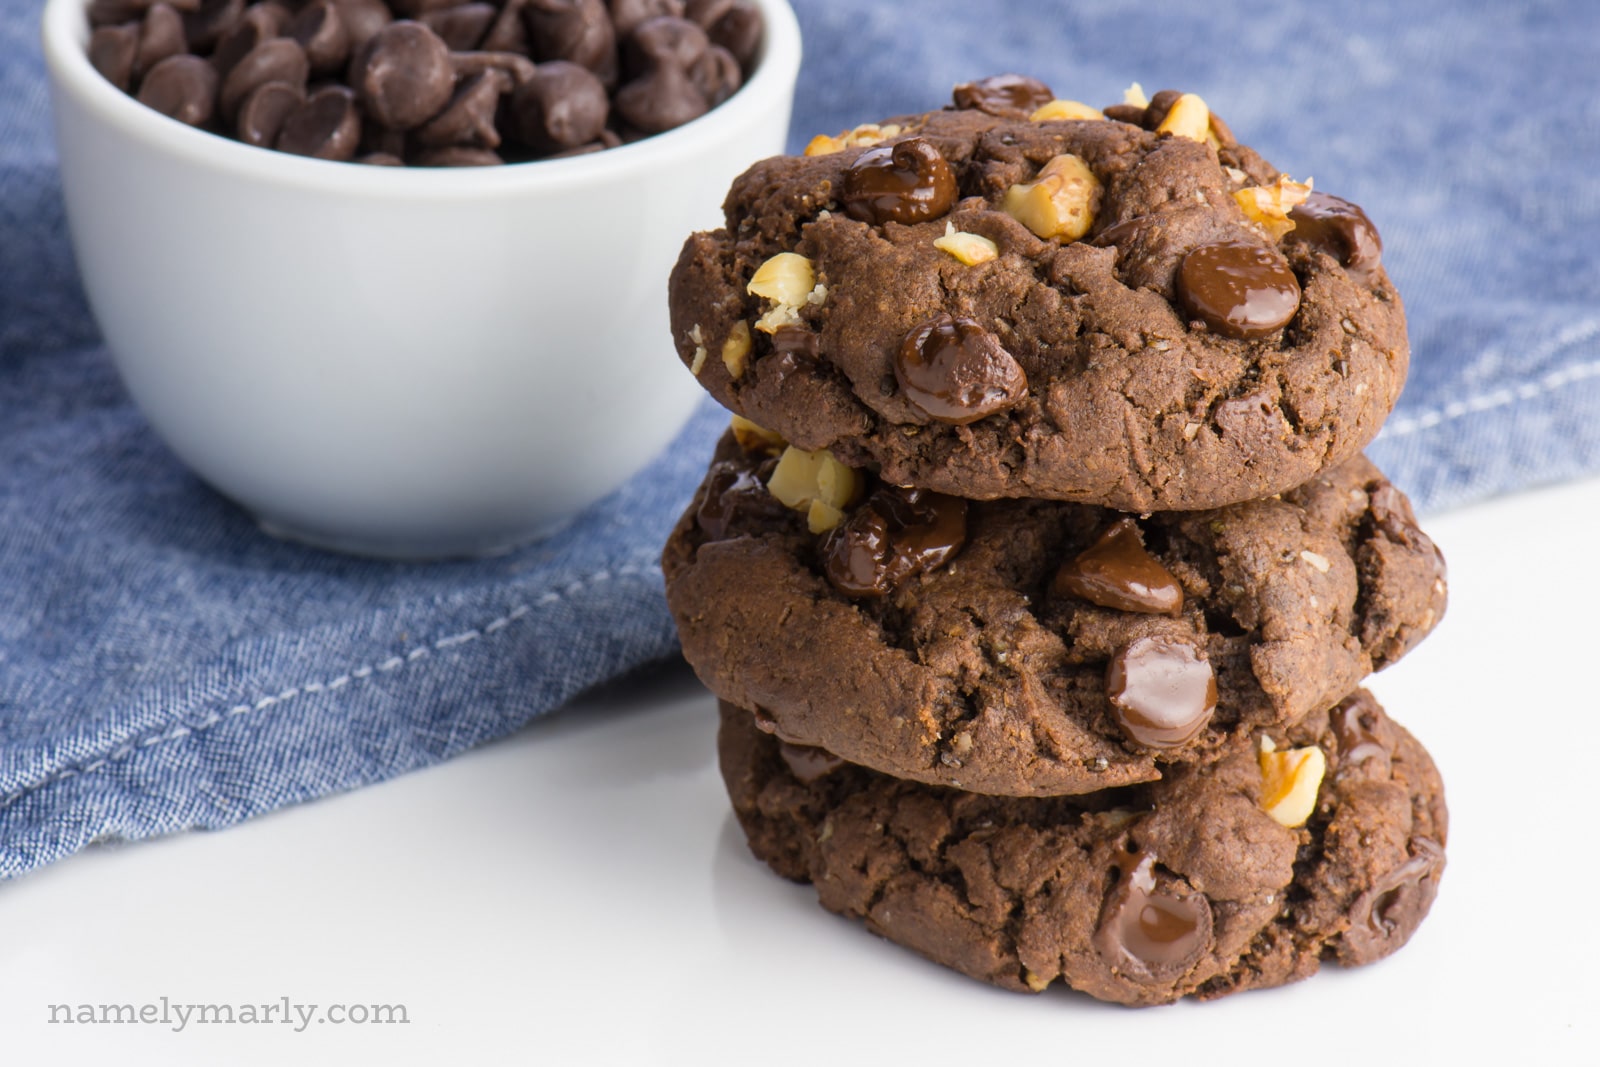 A stack of three chocolate walnut cookies sits on a white surface with a blue napkin folded behind